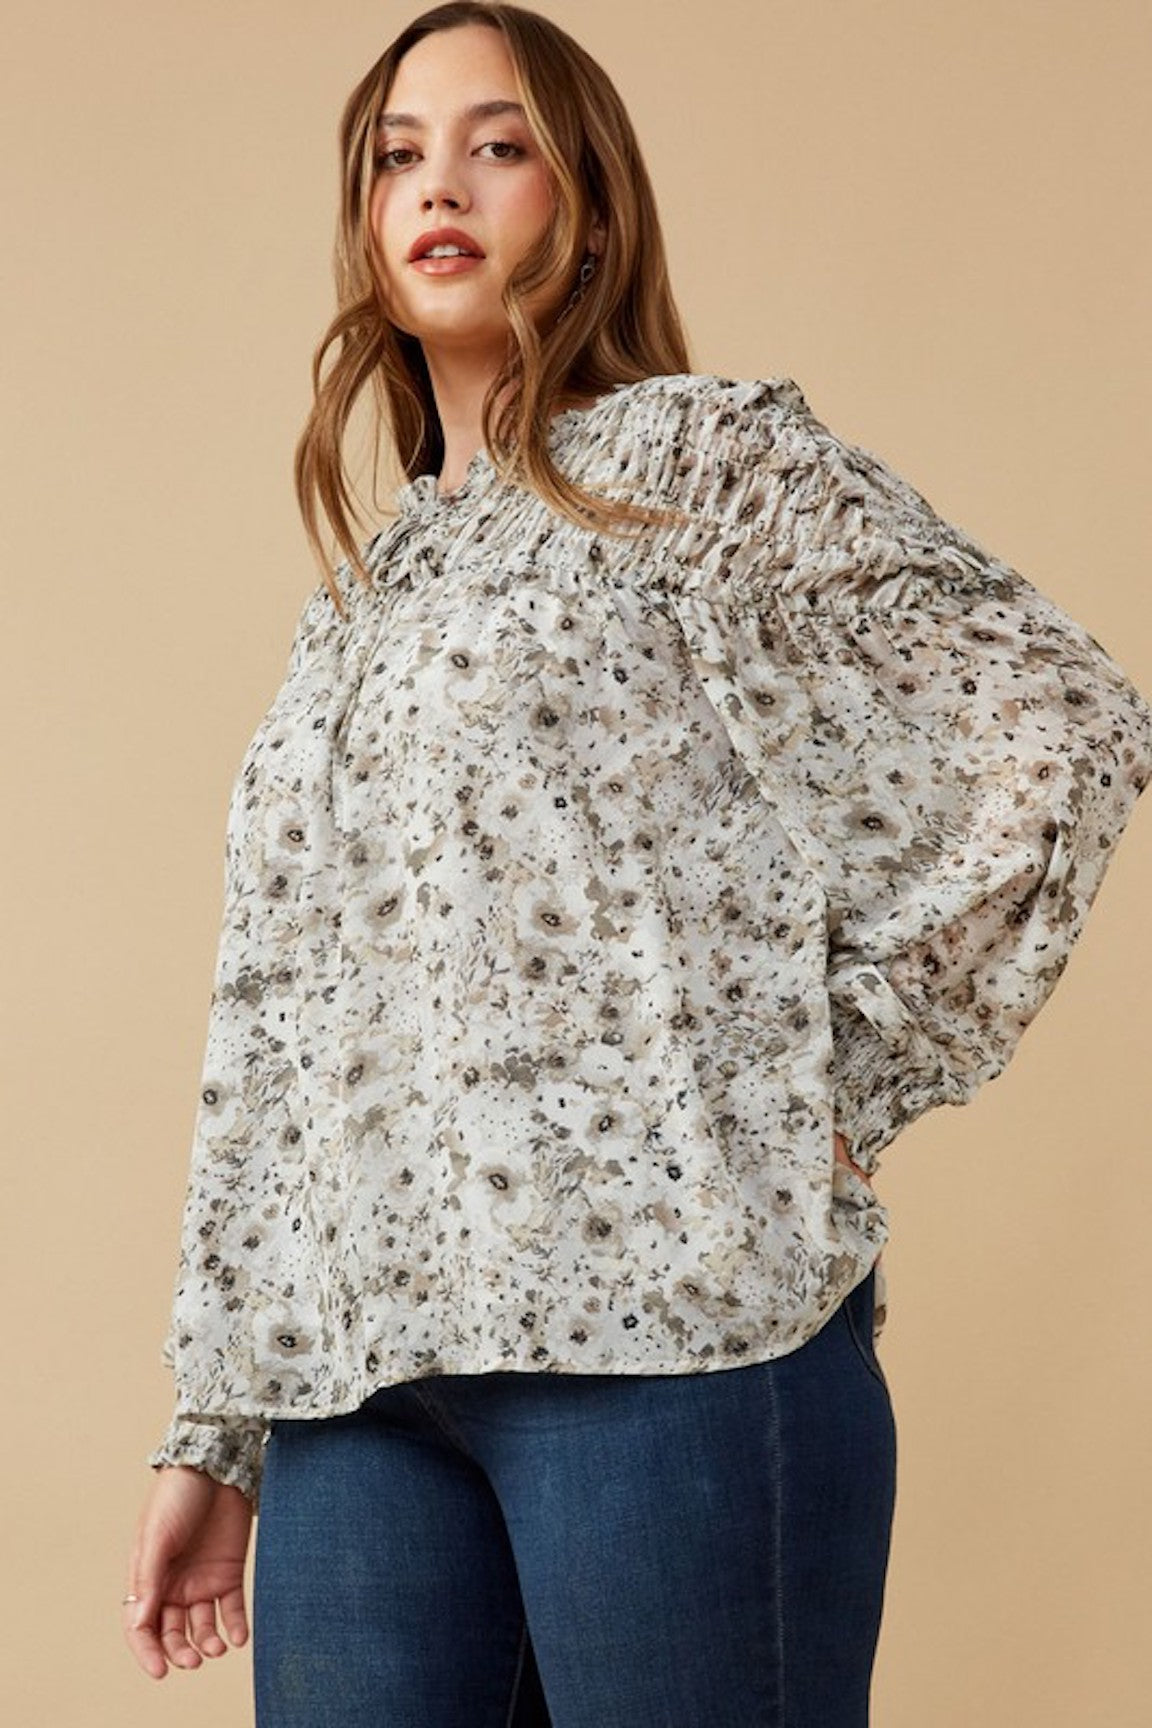 Toni Grey and White Floral Blouse - *CURVY*